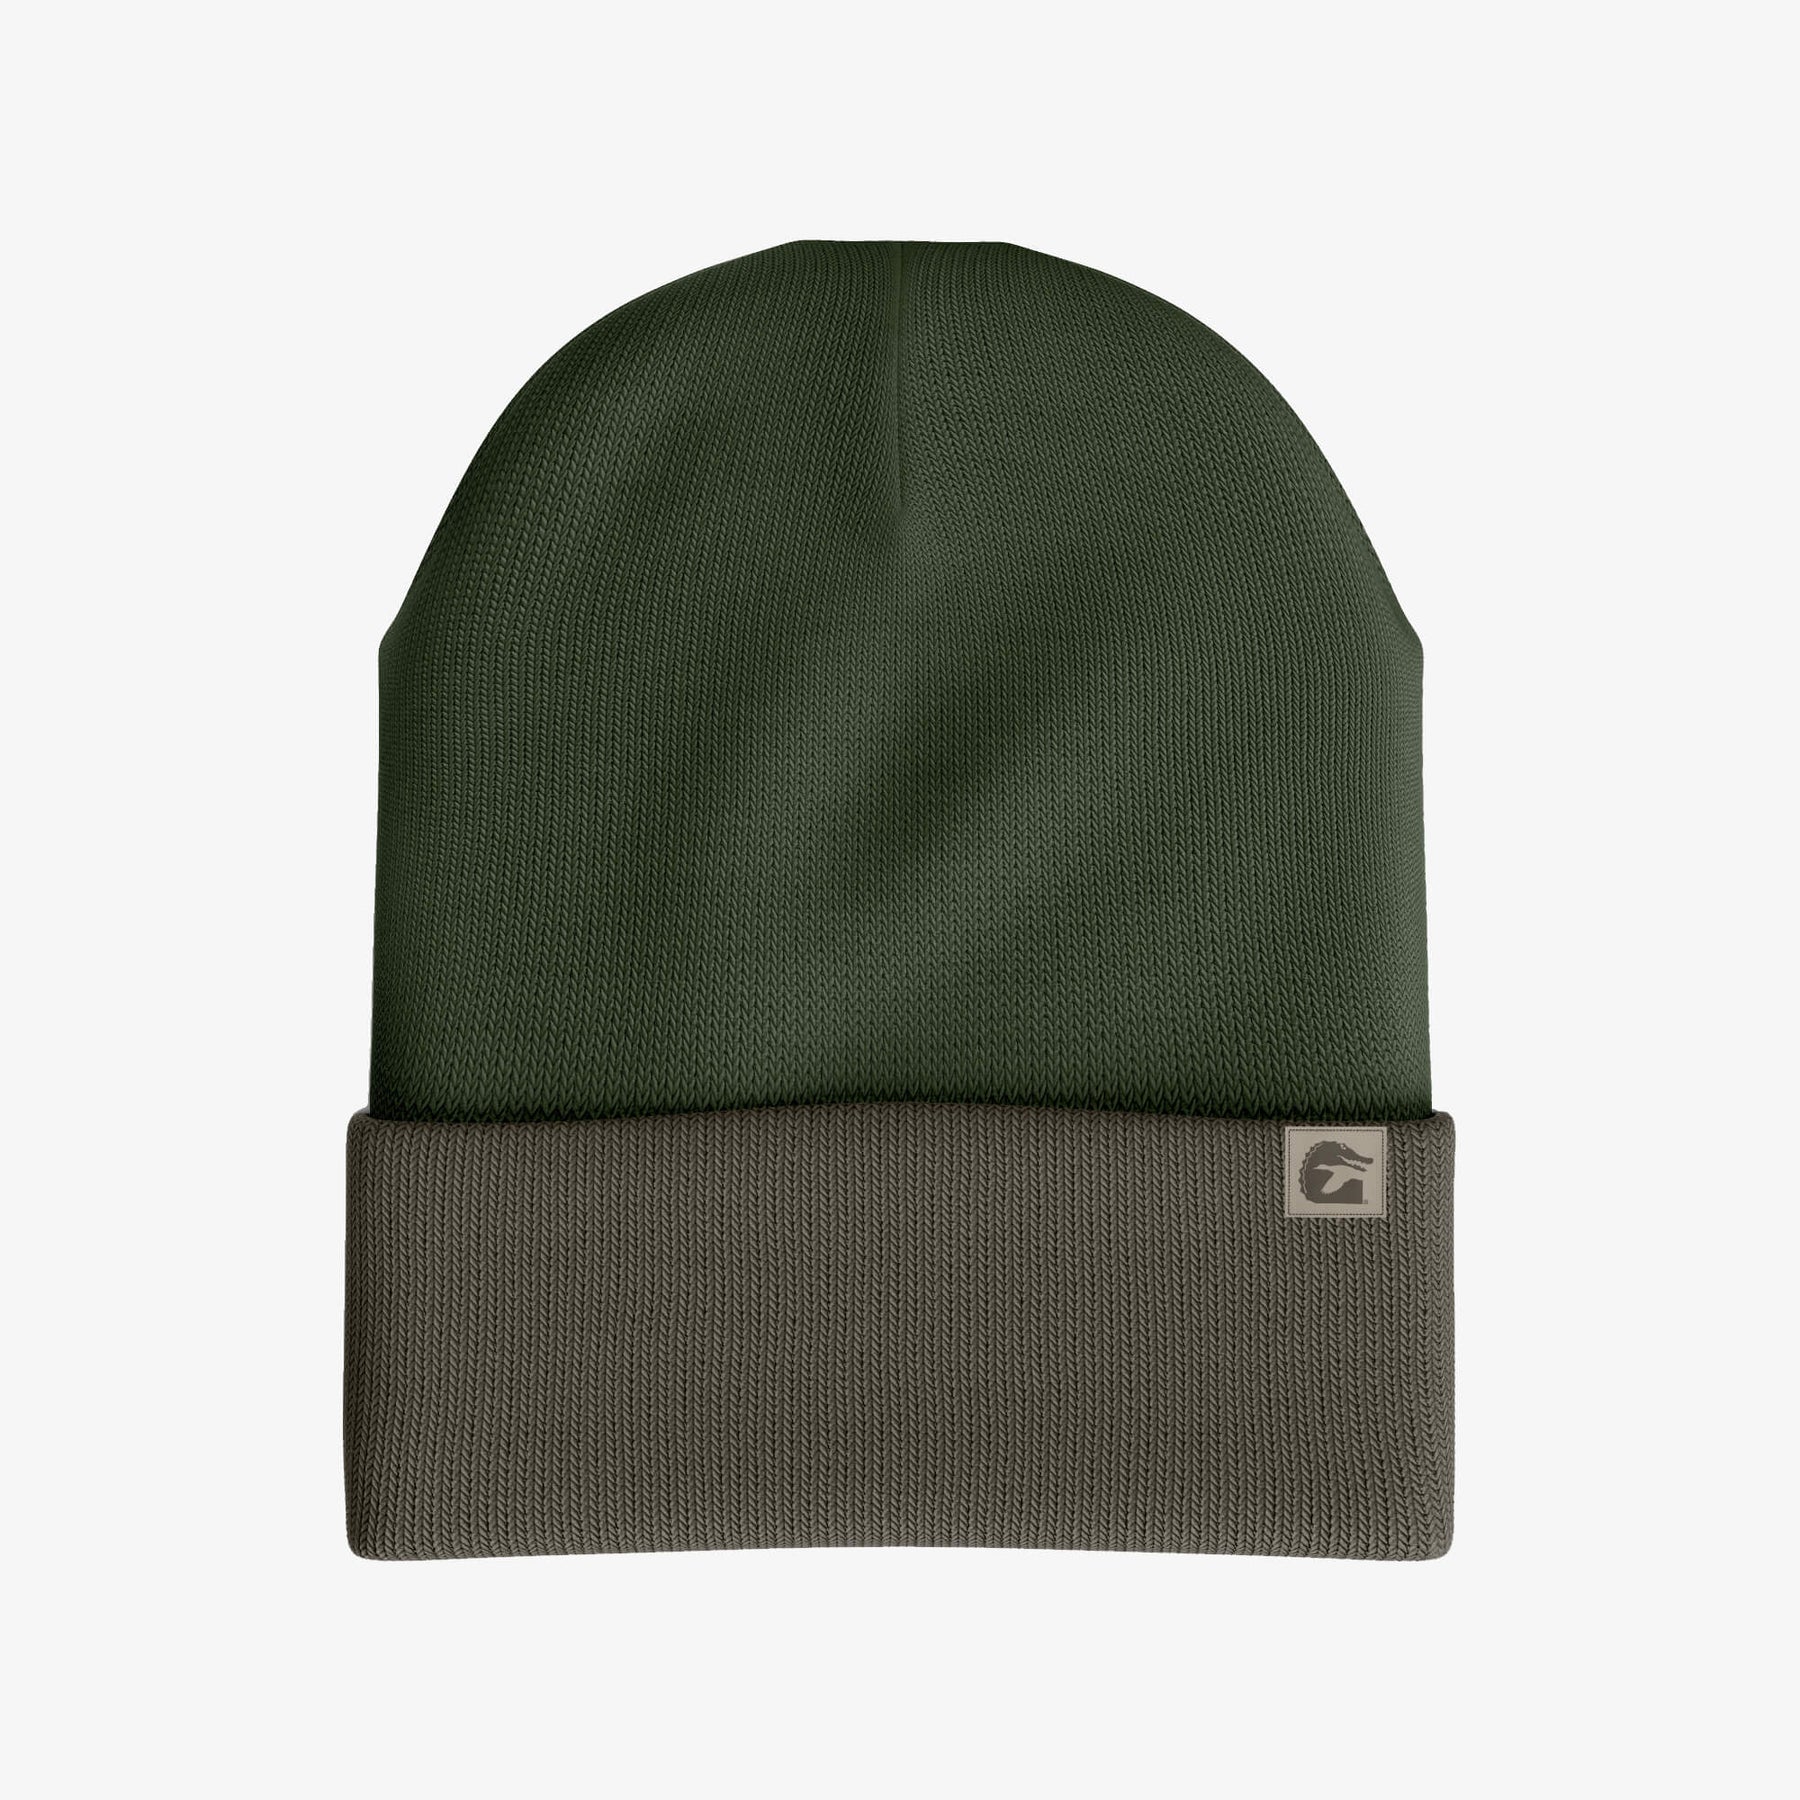 Camp Beanie | Olive by Gator Waders